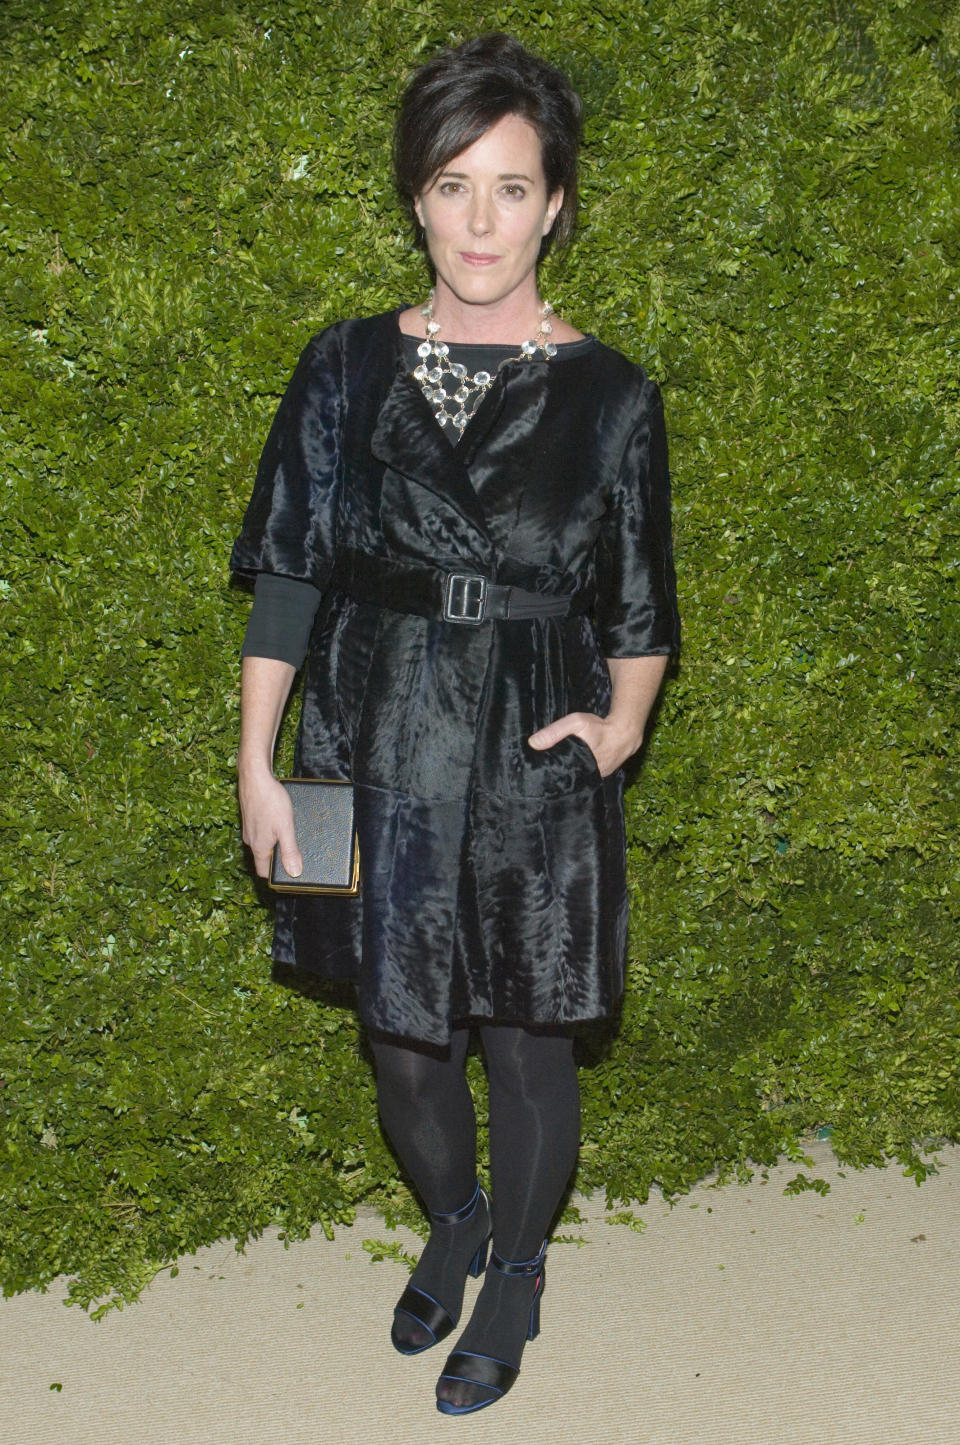 Kate Spade has been found dead in an apparent suicide. Photo: Getty